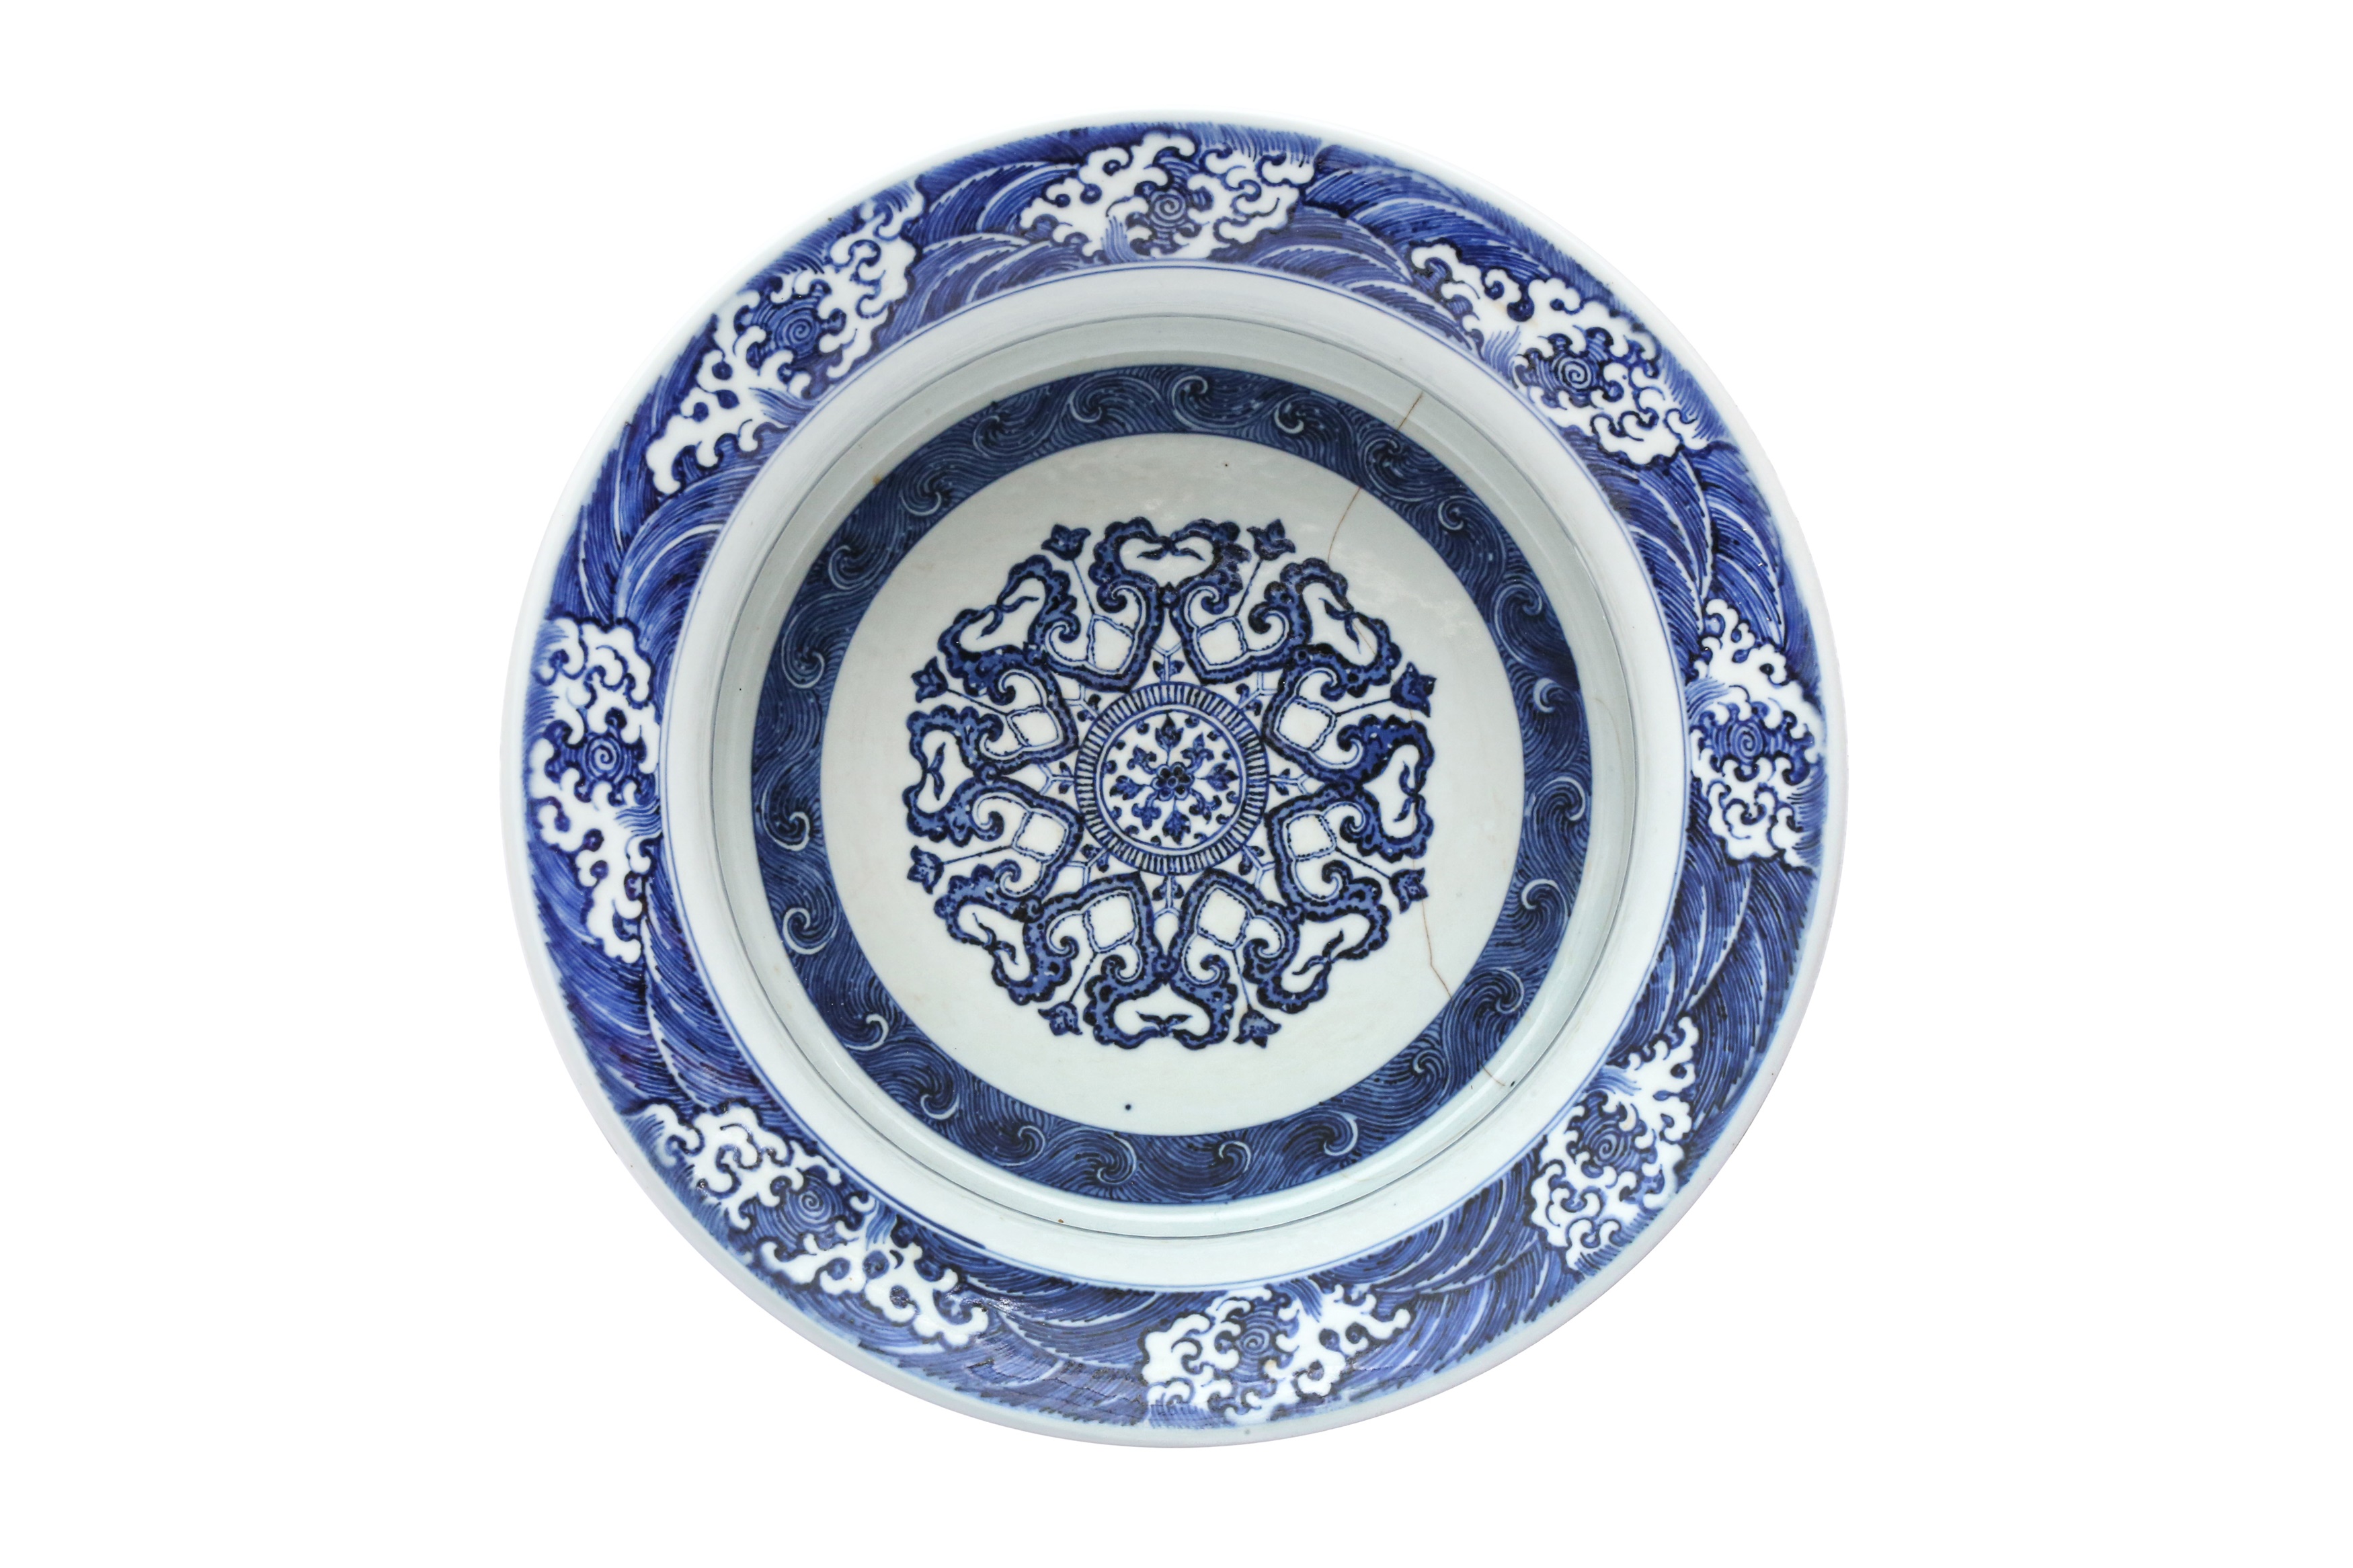 A CHINESE MING-STYLE BLUE AND WHITE 'LOTUS' BASIN 明式青花纏枝蓮紋盆 《大清雍正年製》款 - Image 2 of 14